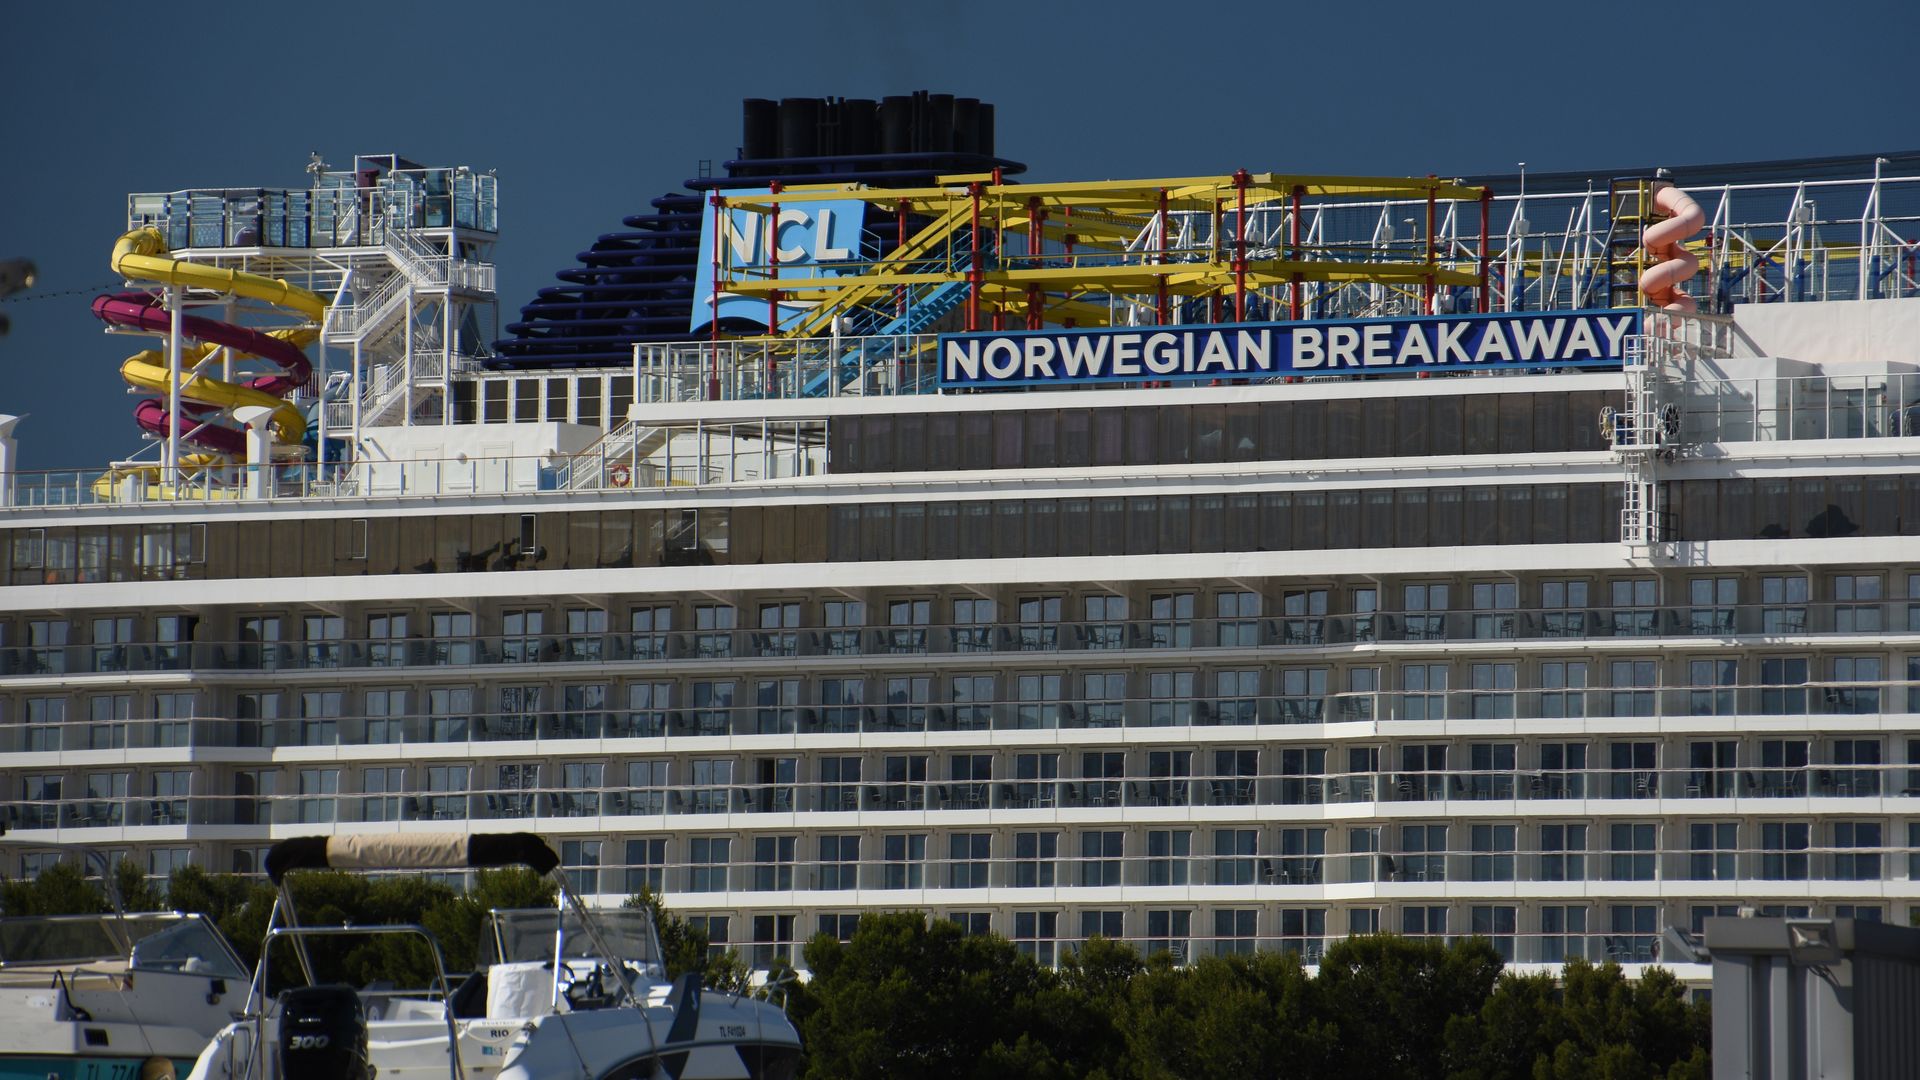 A view of the Norwegian Breakaway cruise ship in Marseille, France, on May 25, 2020.